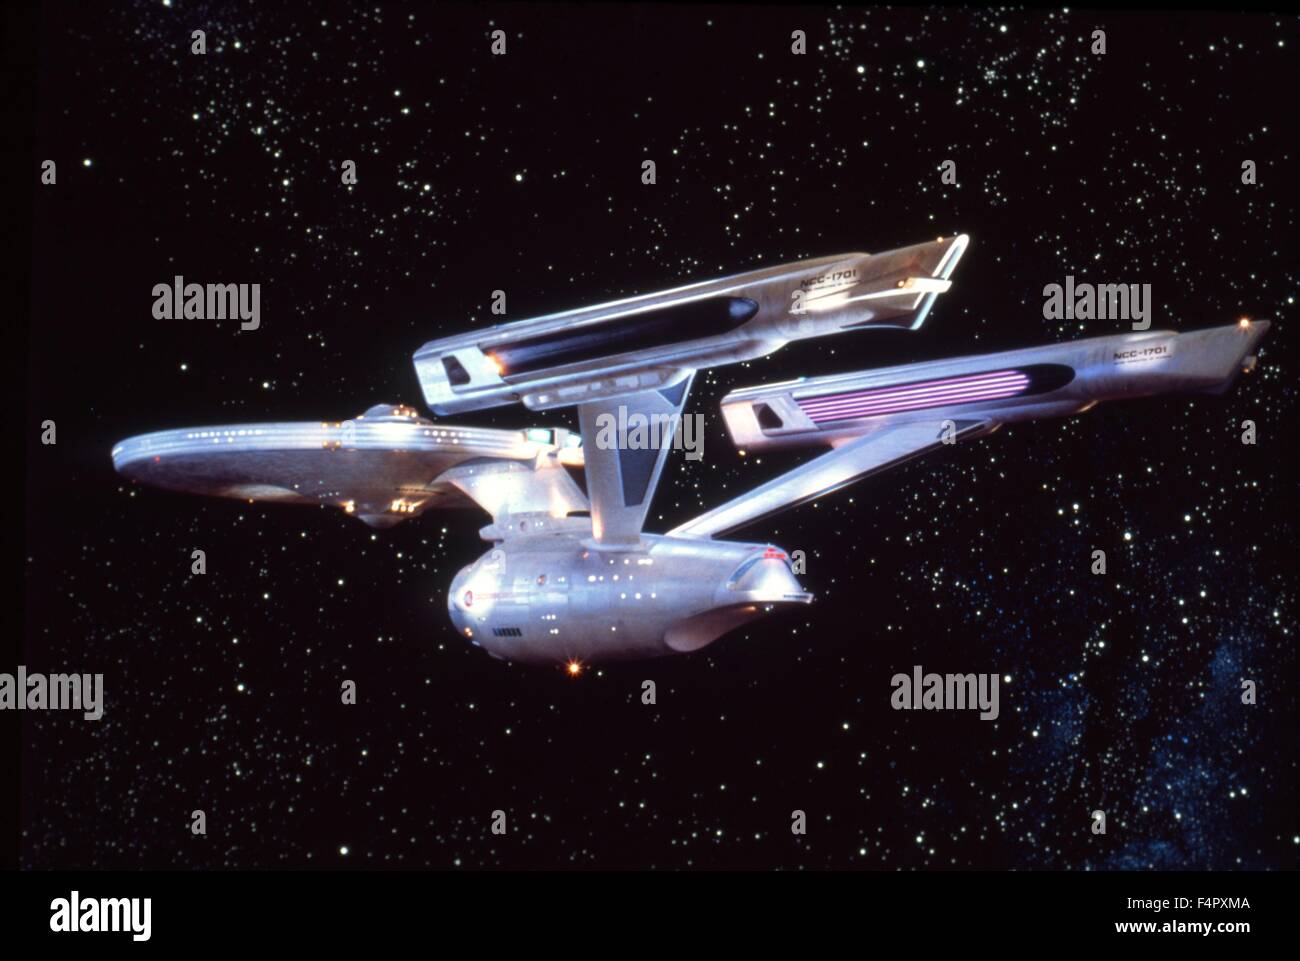 Star Trek : Enterprise / Star Trek : The Motion Pictures / 1979 / directed by Robert Wise / [Paramount Pictures] Stock Photo